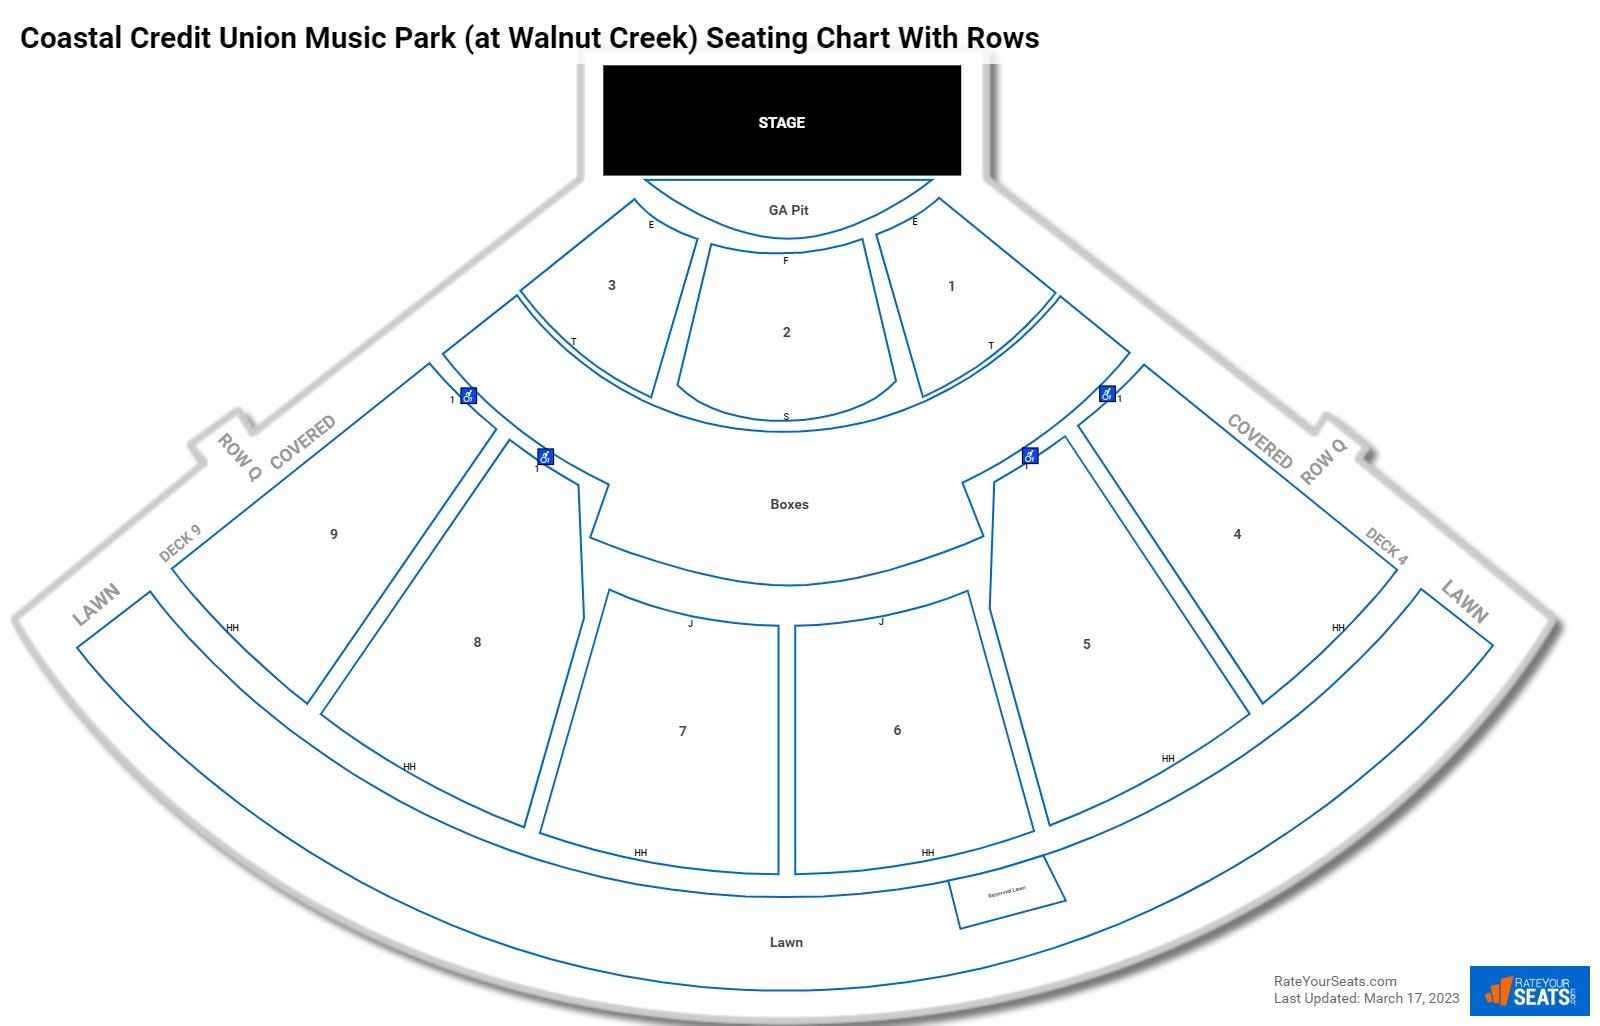 Coastal Credit Union Music Park (at Walnut Creek) seating chart with row numbers